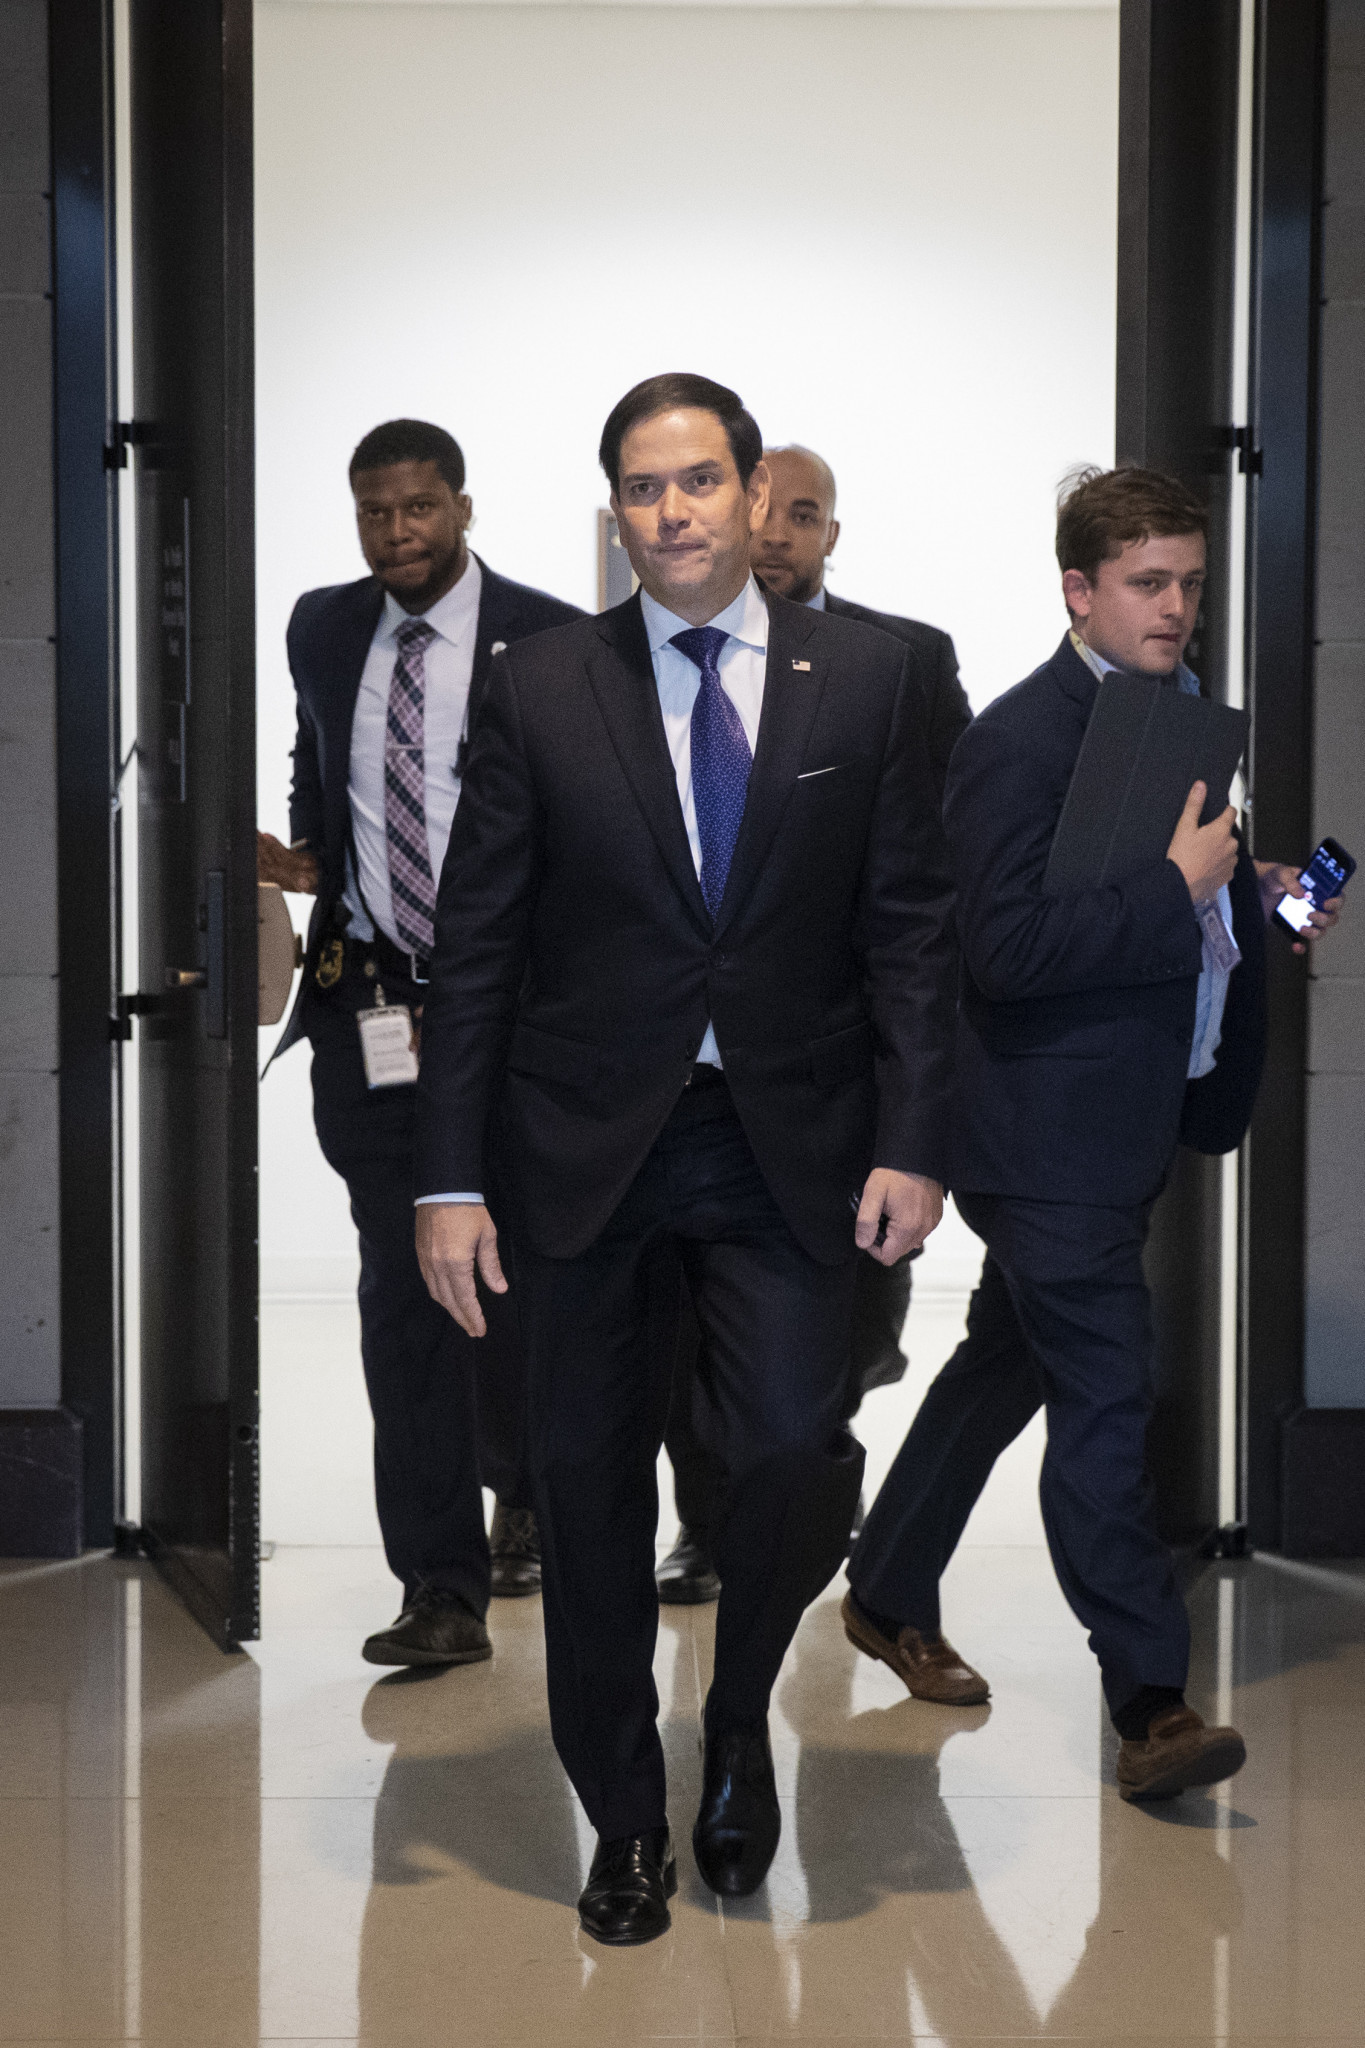 The chairman of the Commission, Marco Rubio, centre, has said Beijing should not host the 2022 Winter Olympic and Paralympic Games ©Getty Images